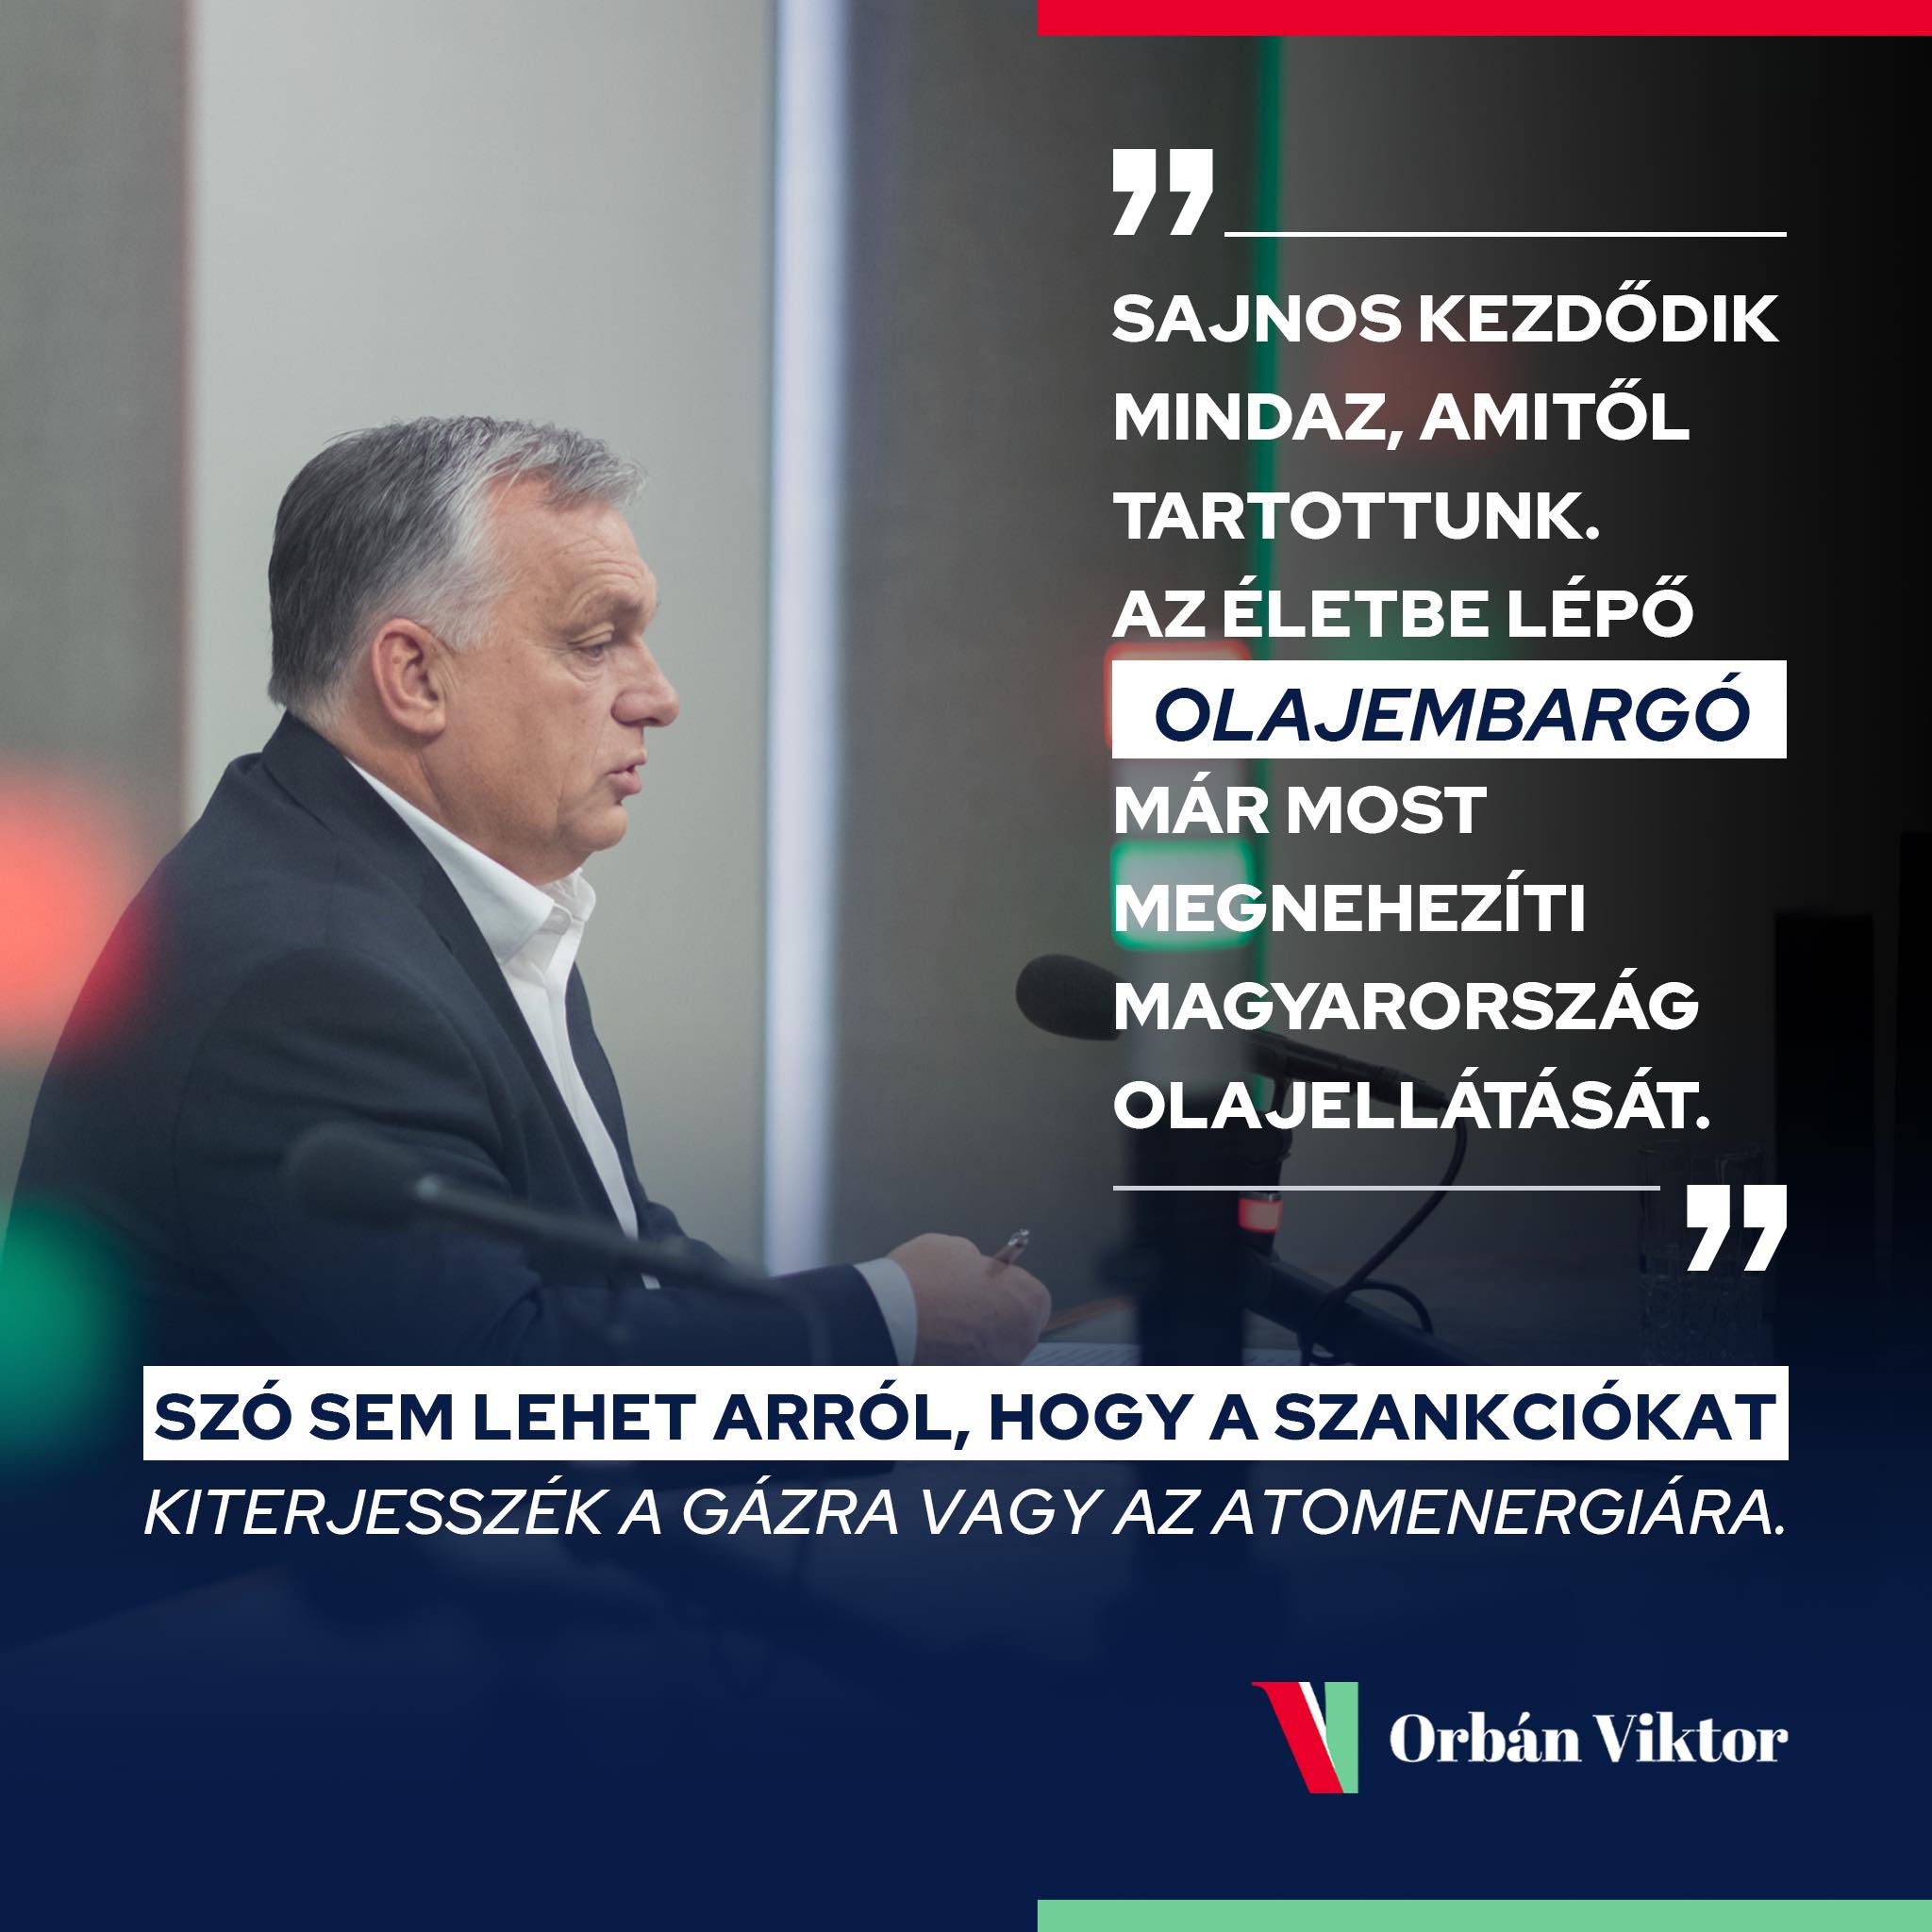 Orbán Warns of Consequences of EU Sanctions, Opposition in Hungary Slam His Remarks